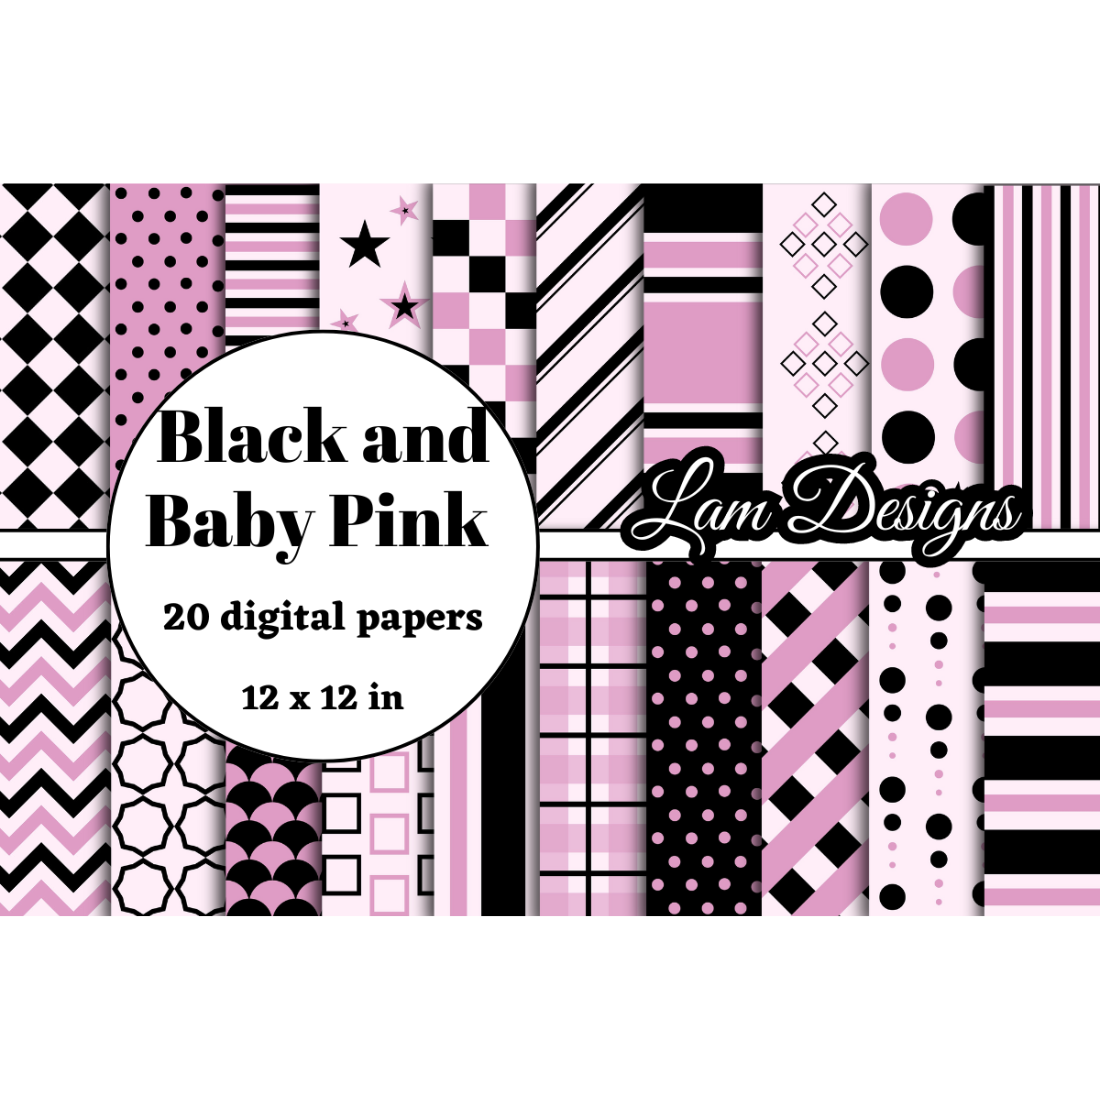 black and baby pink digital papers cover image.